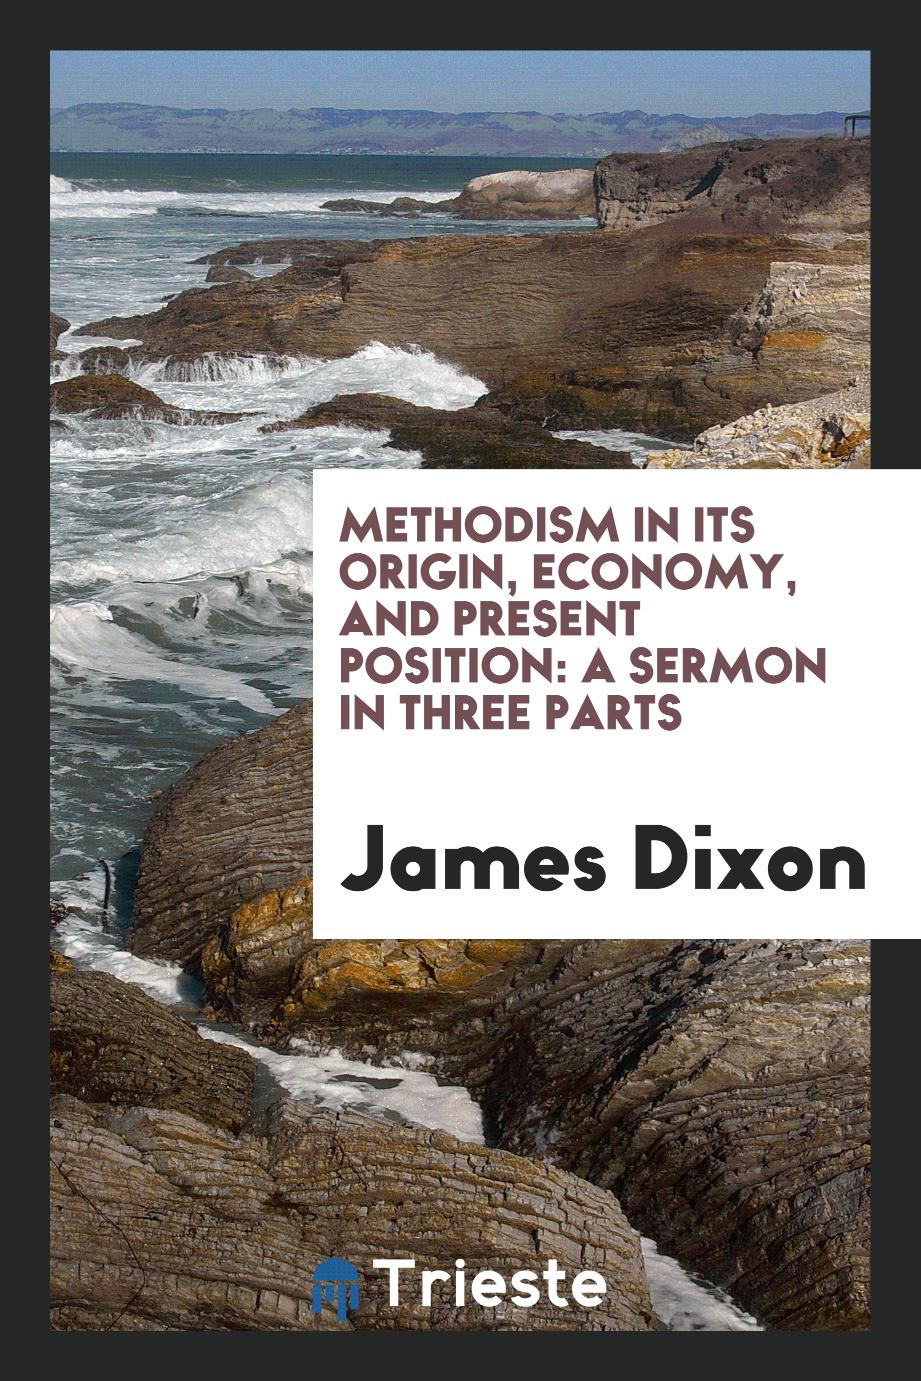 Methodism in Its Origin, Economy, and Present Position: A Sermon in Three Parts